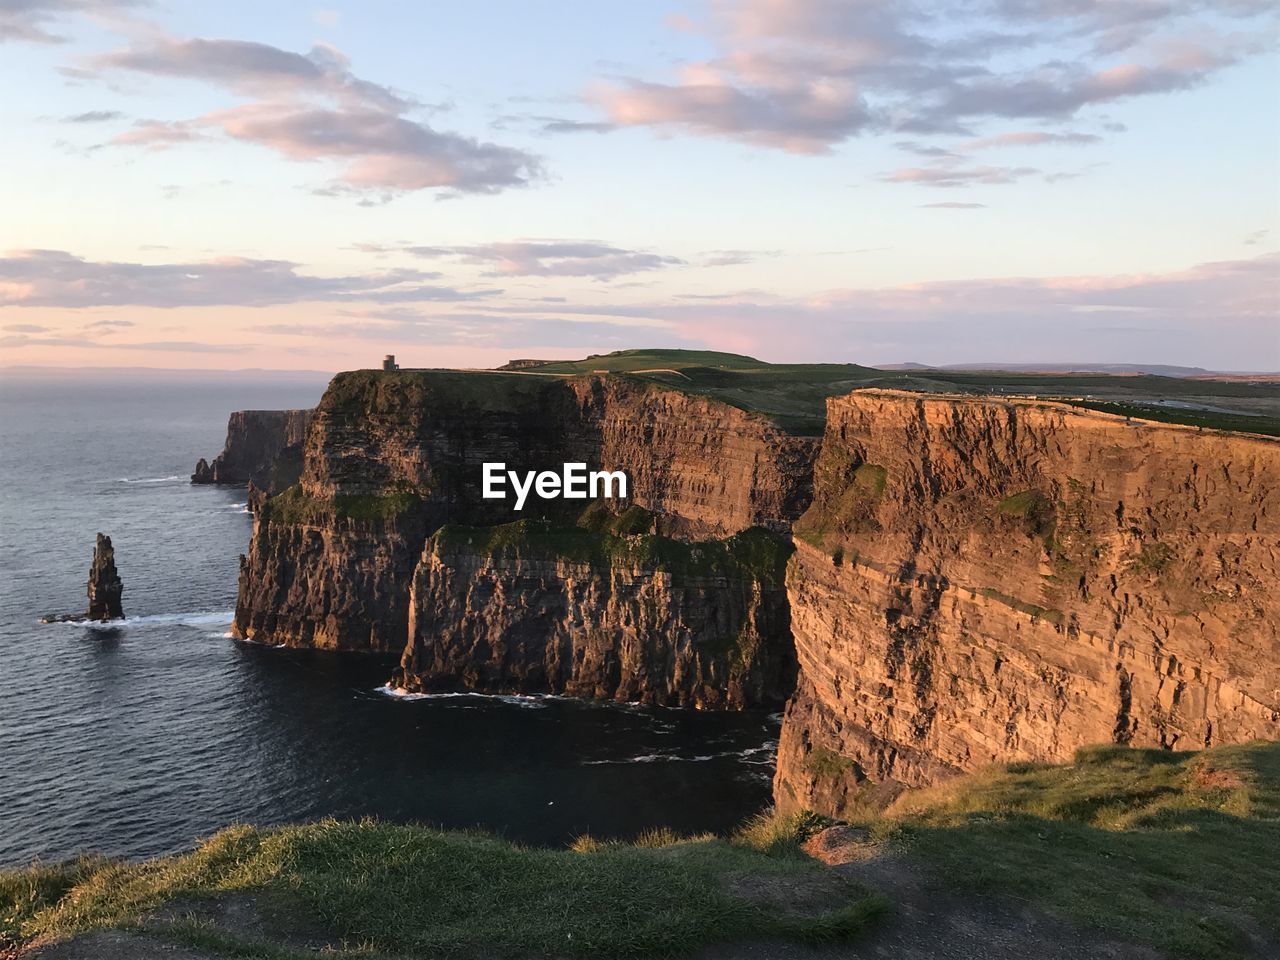 This picture was taken during sunset in the cliffs of moher in ireland.